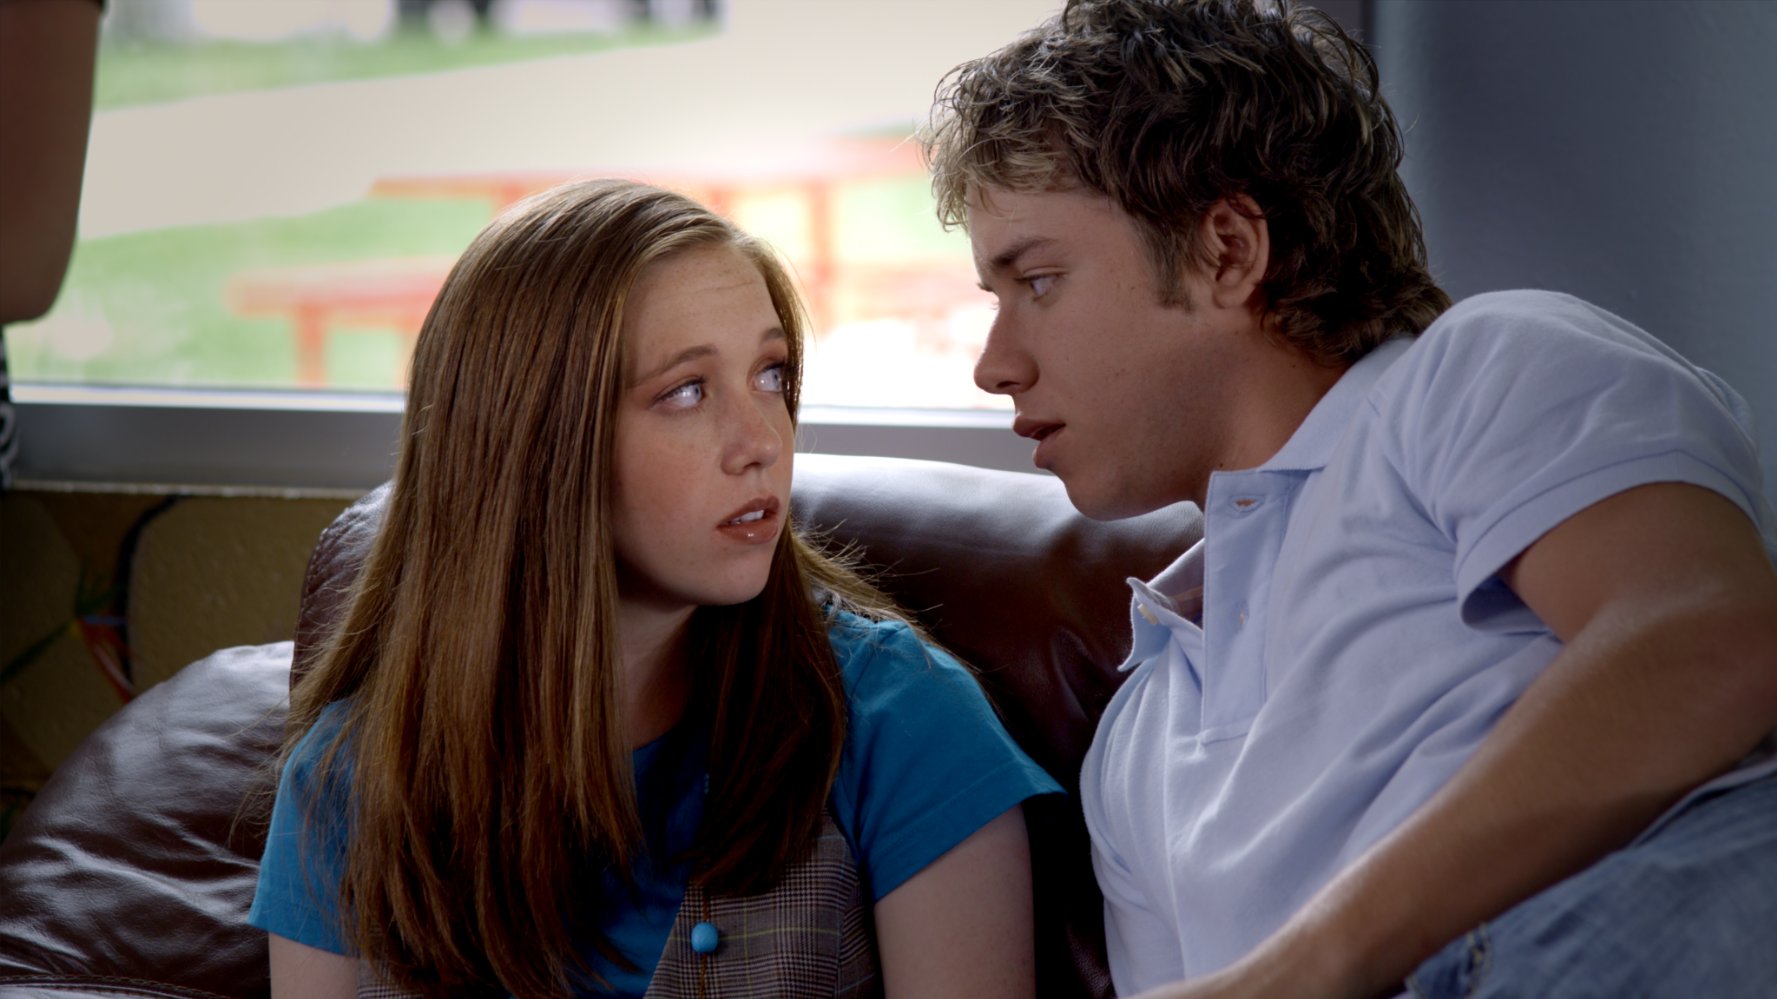 Jeremy Sumpter in You're So Cupid!